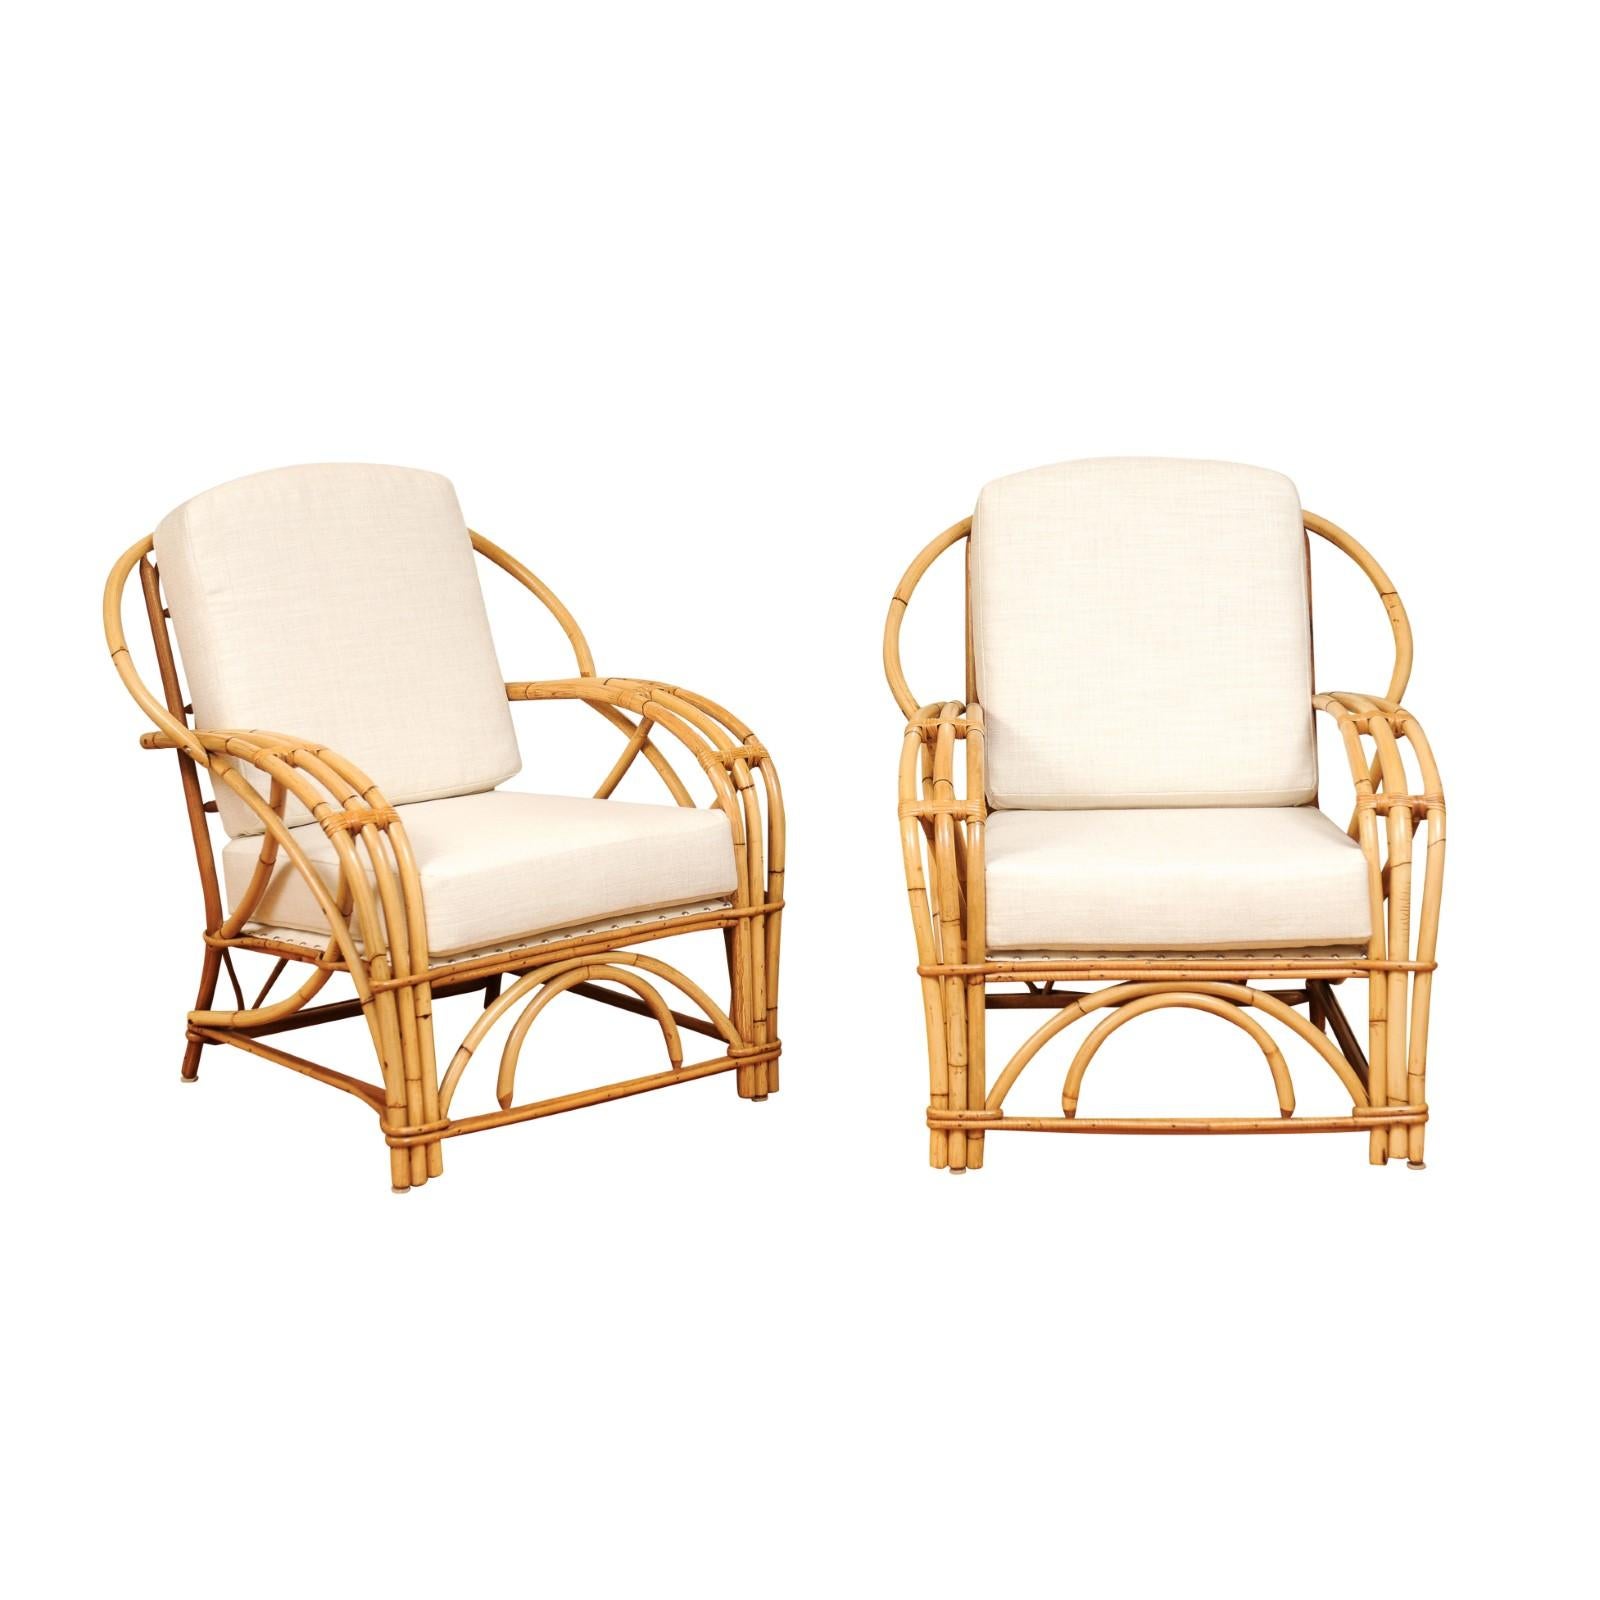 Exceptional Pair of Art Deco Rattan Loungers by Willow & Reed, circa 1945 For Sale 14